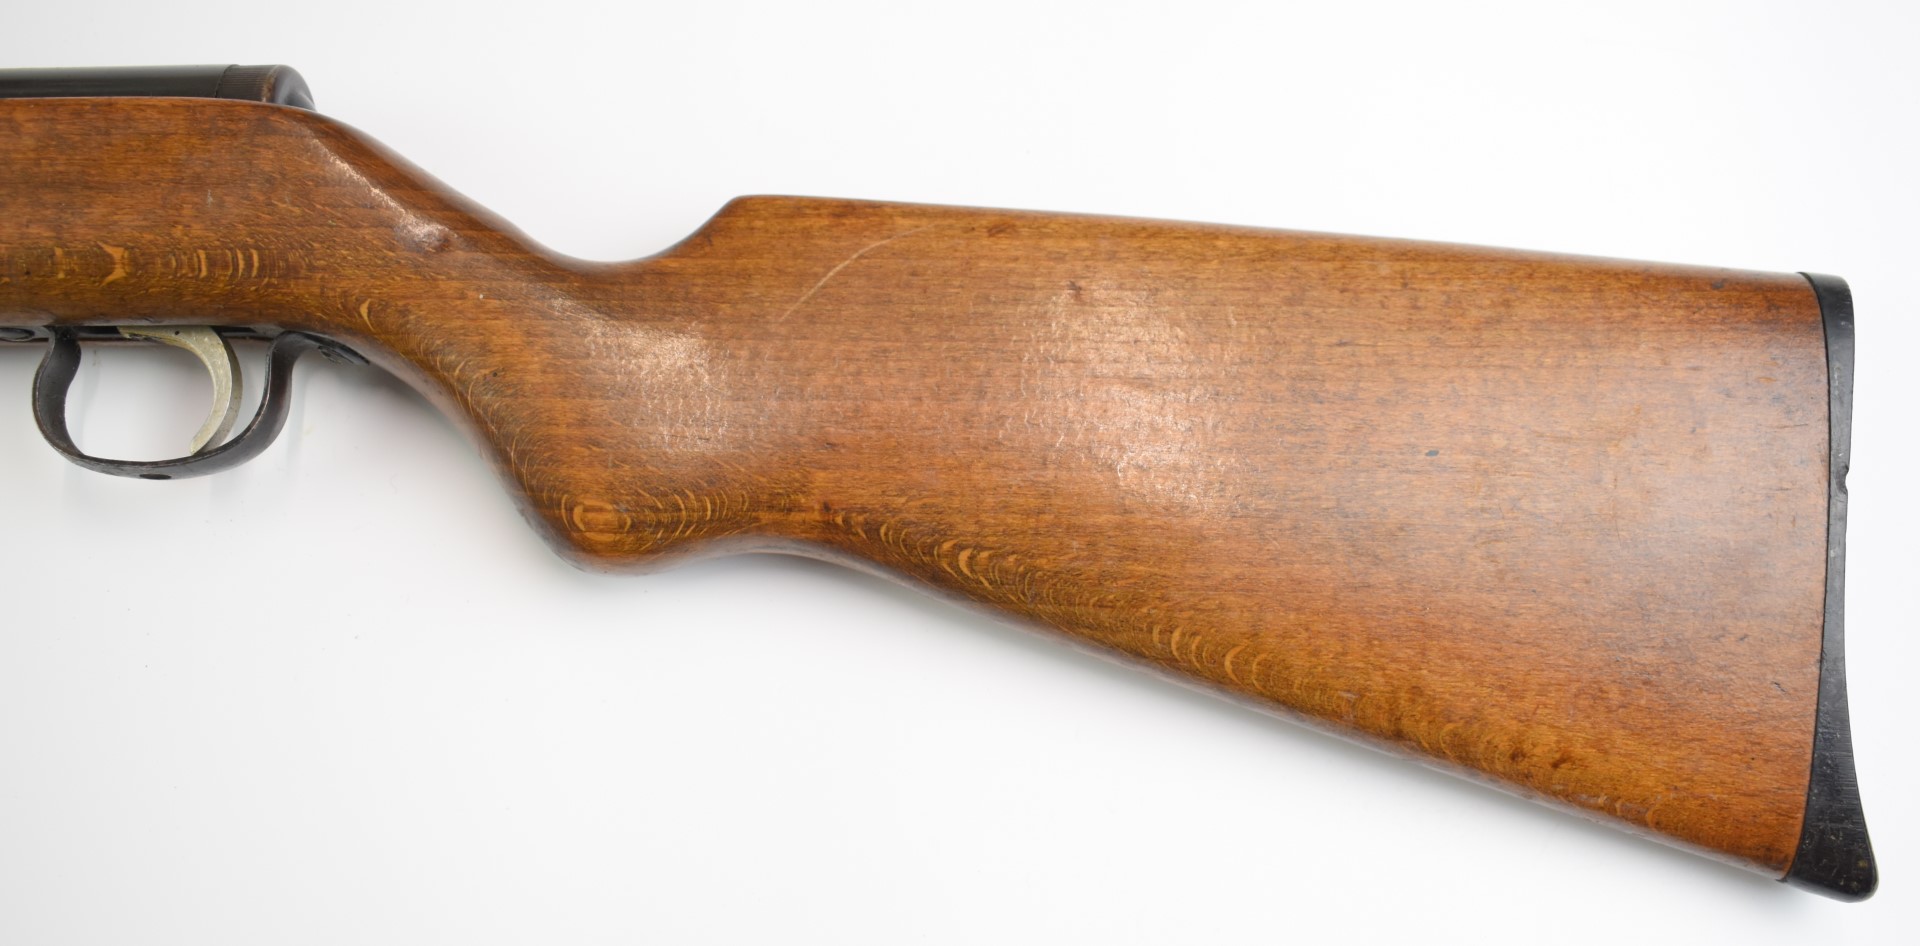 Original Mod 50E .22 under-lever air rifle with semi-pistol grip and adjustable sights and - Image 7 of 10